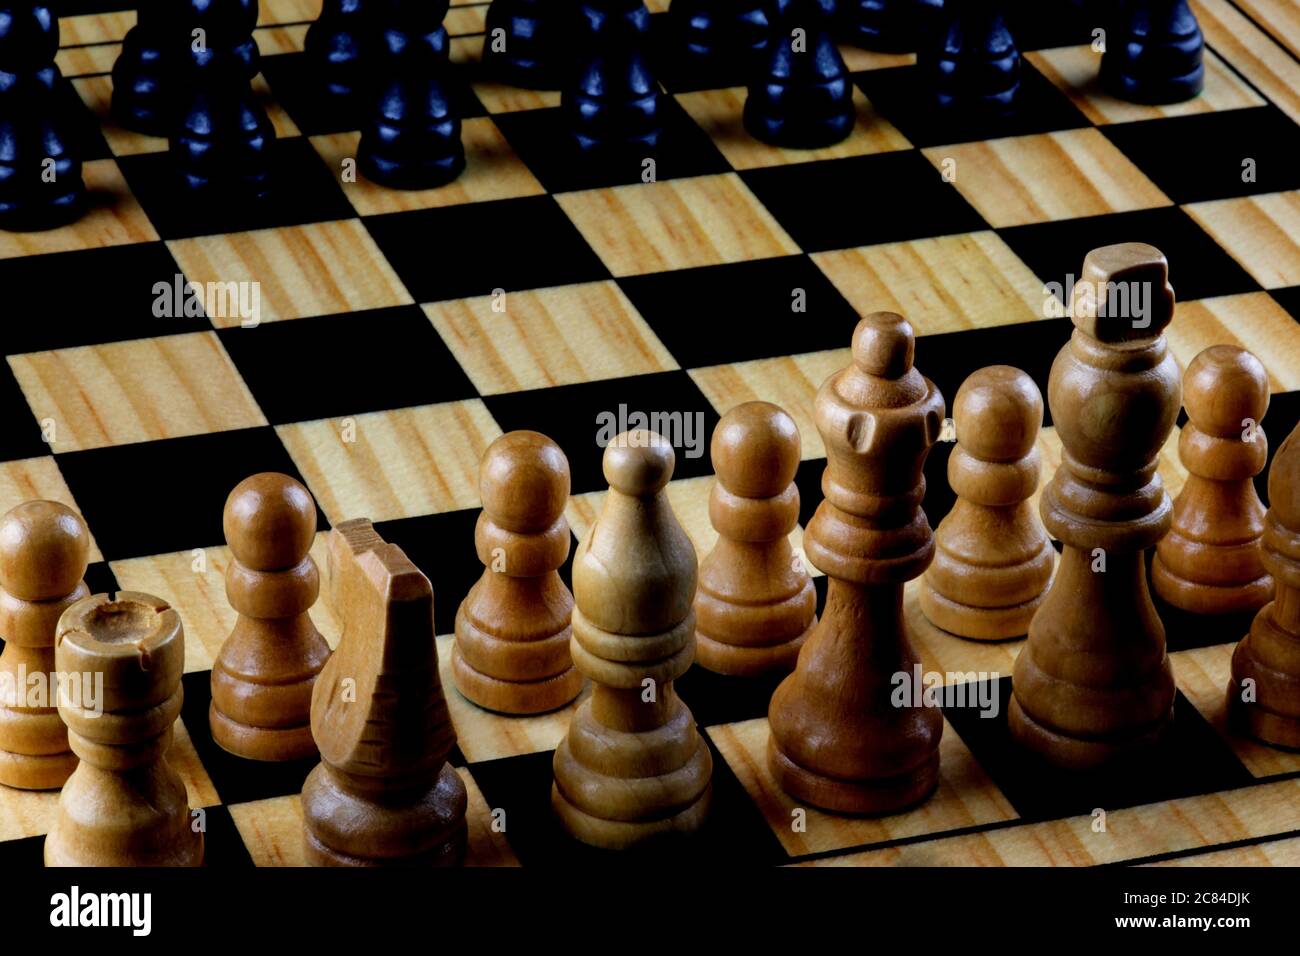 Chess pieces on chess board close up view Stock Photo